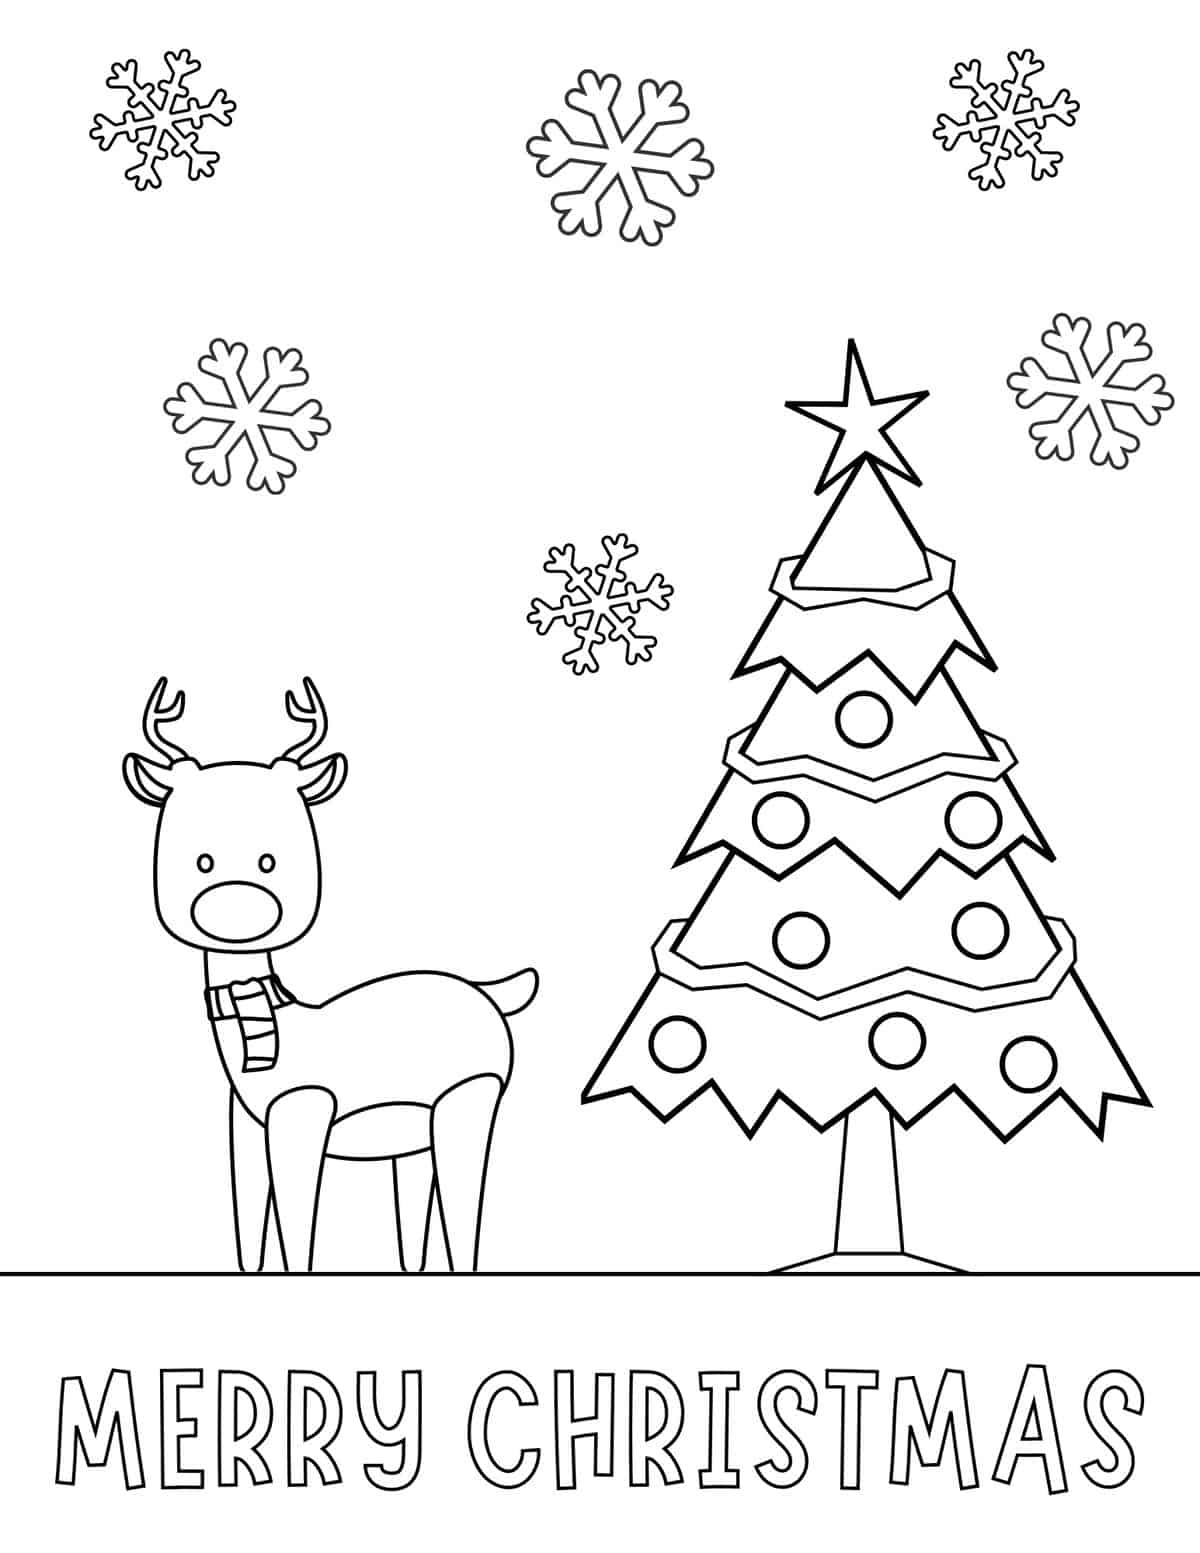 reindeer with christmas tree and snowflakes in the background coloring sheet